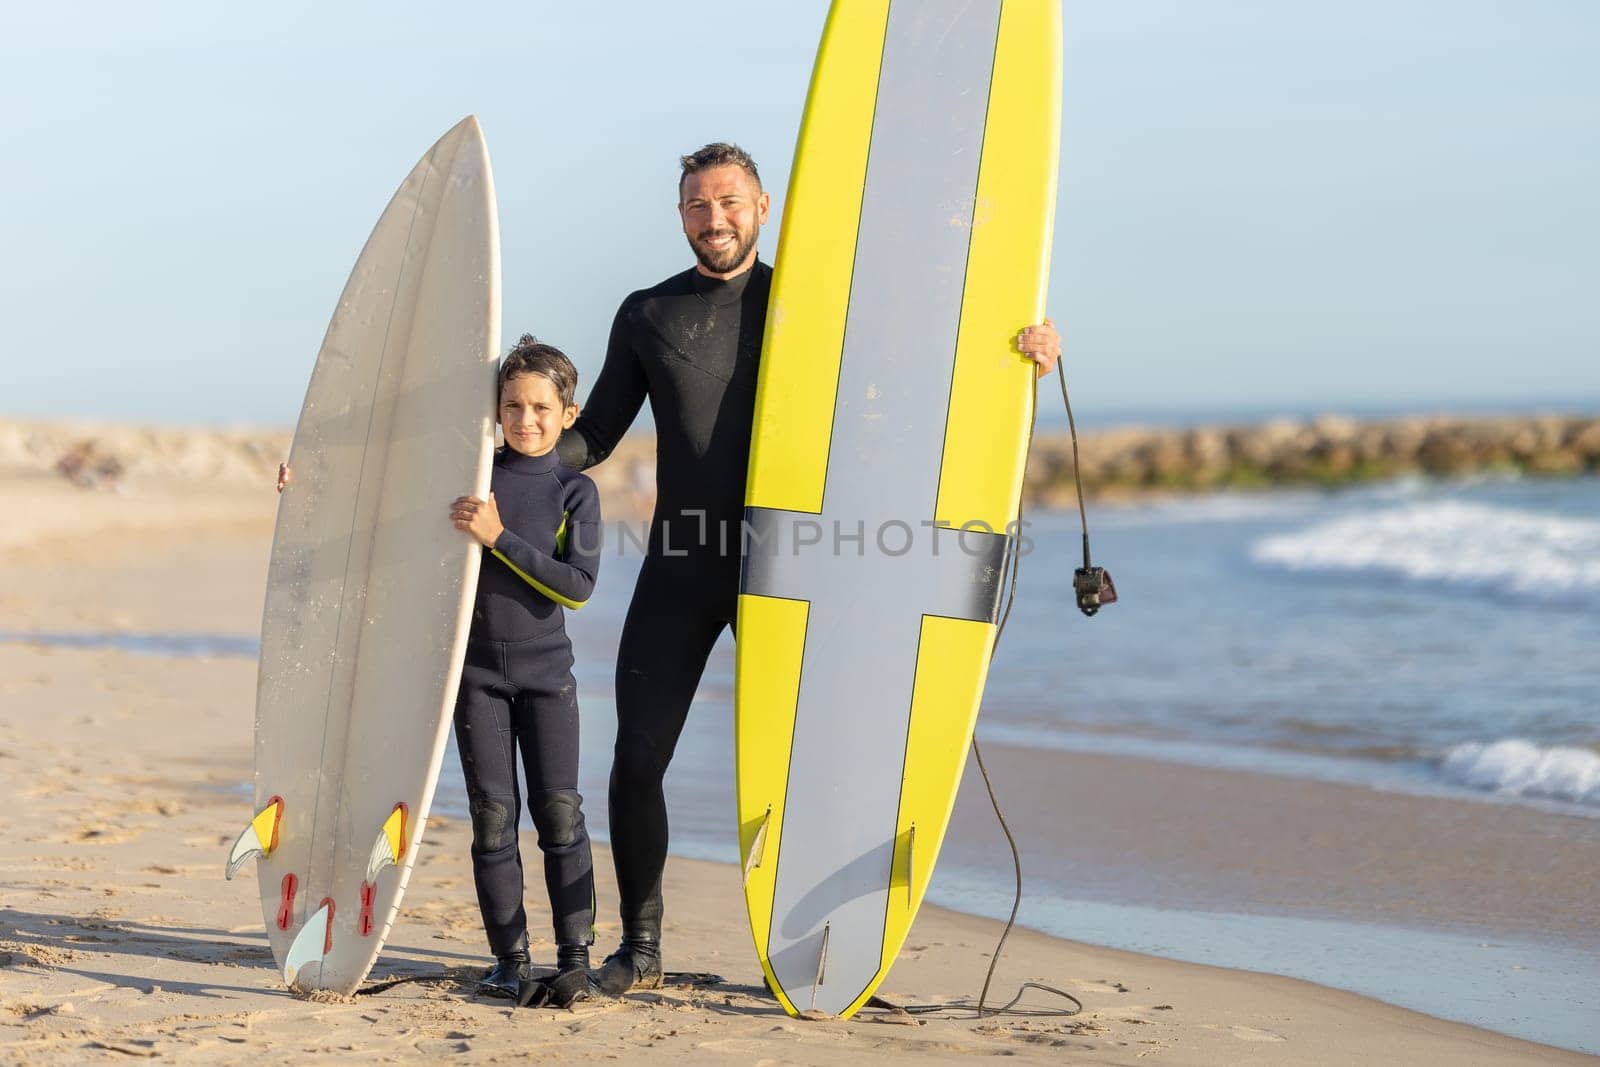 A family of surfers - smiling father and son standing on the seashore with their surfing boards. Mid shot